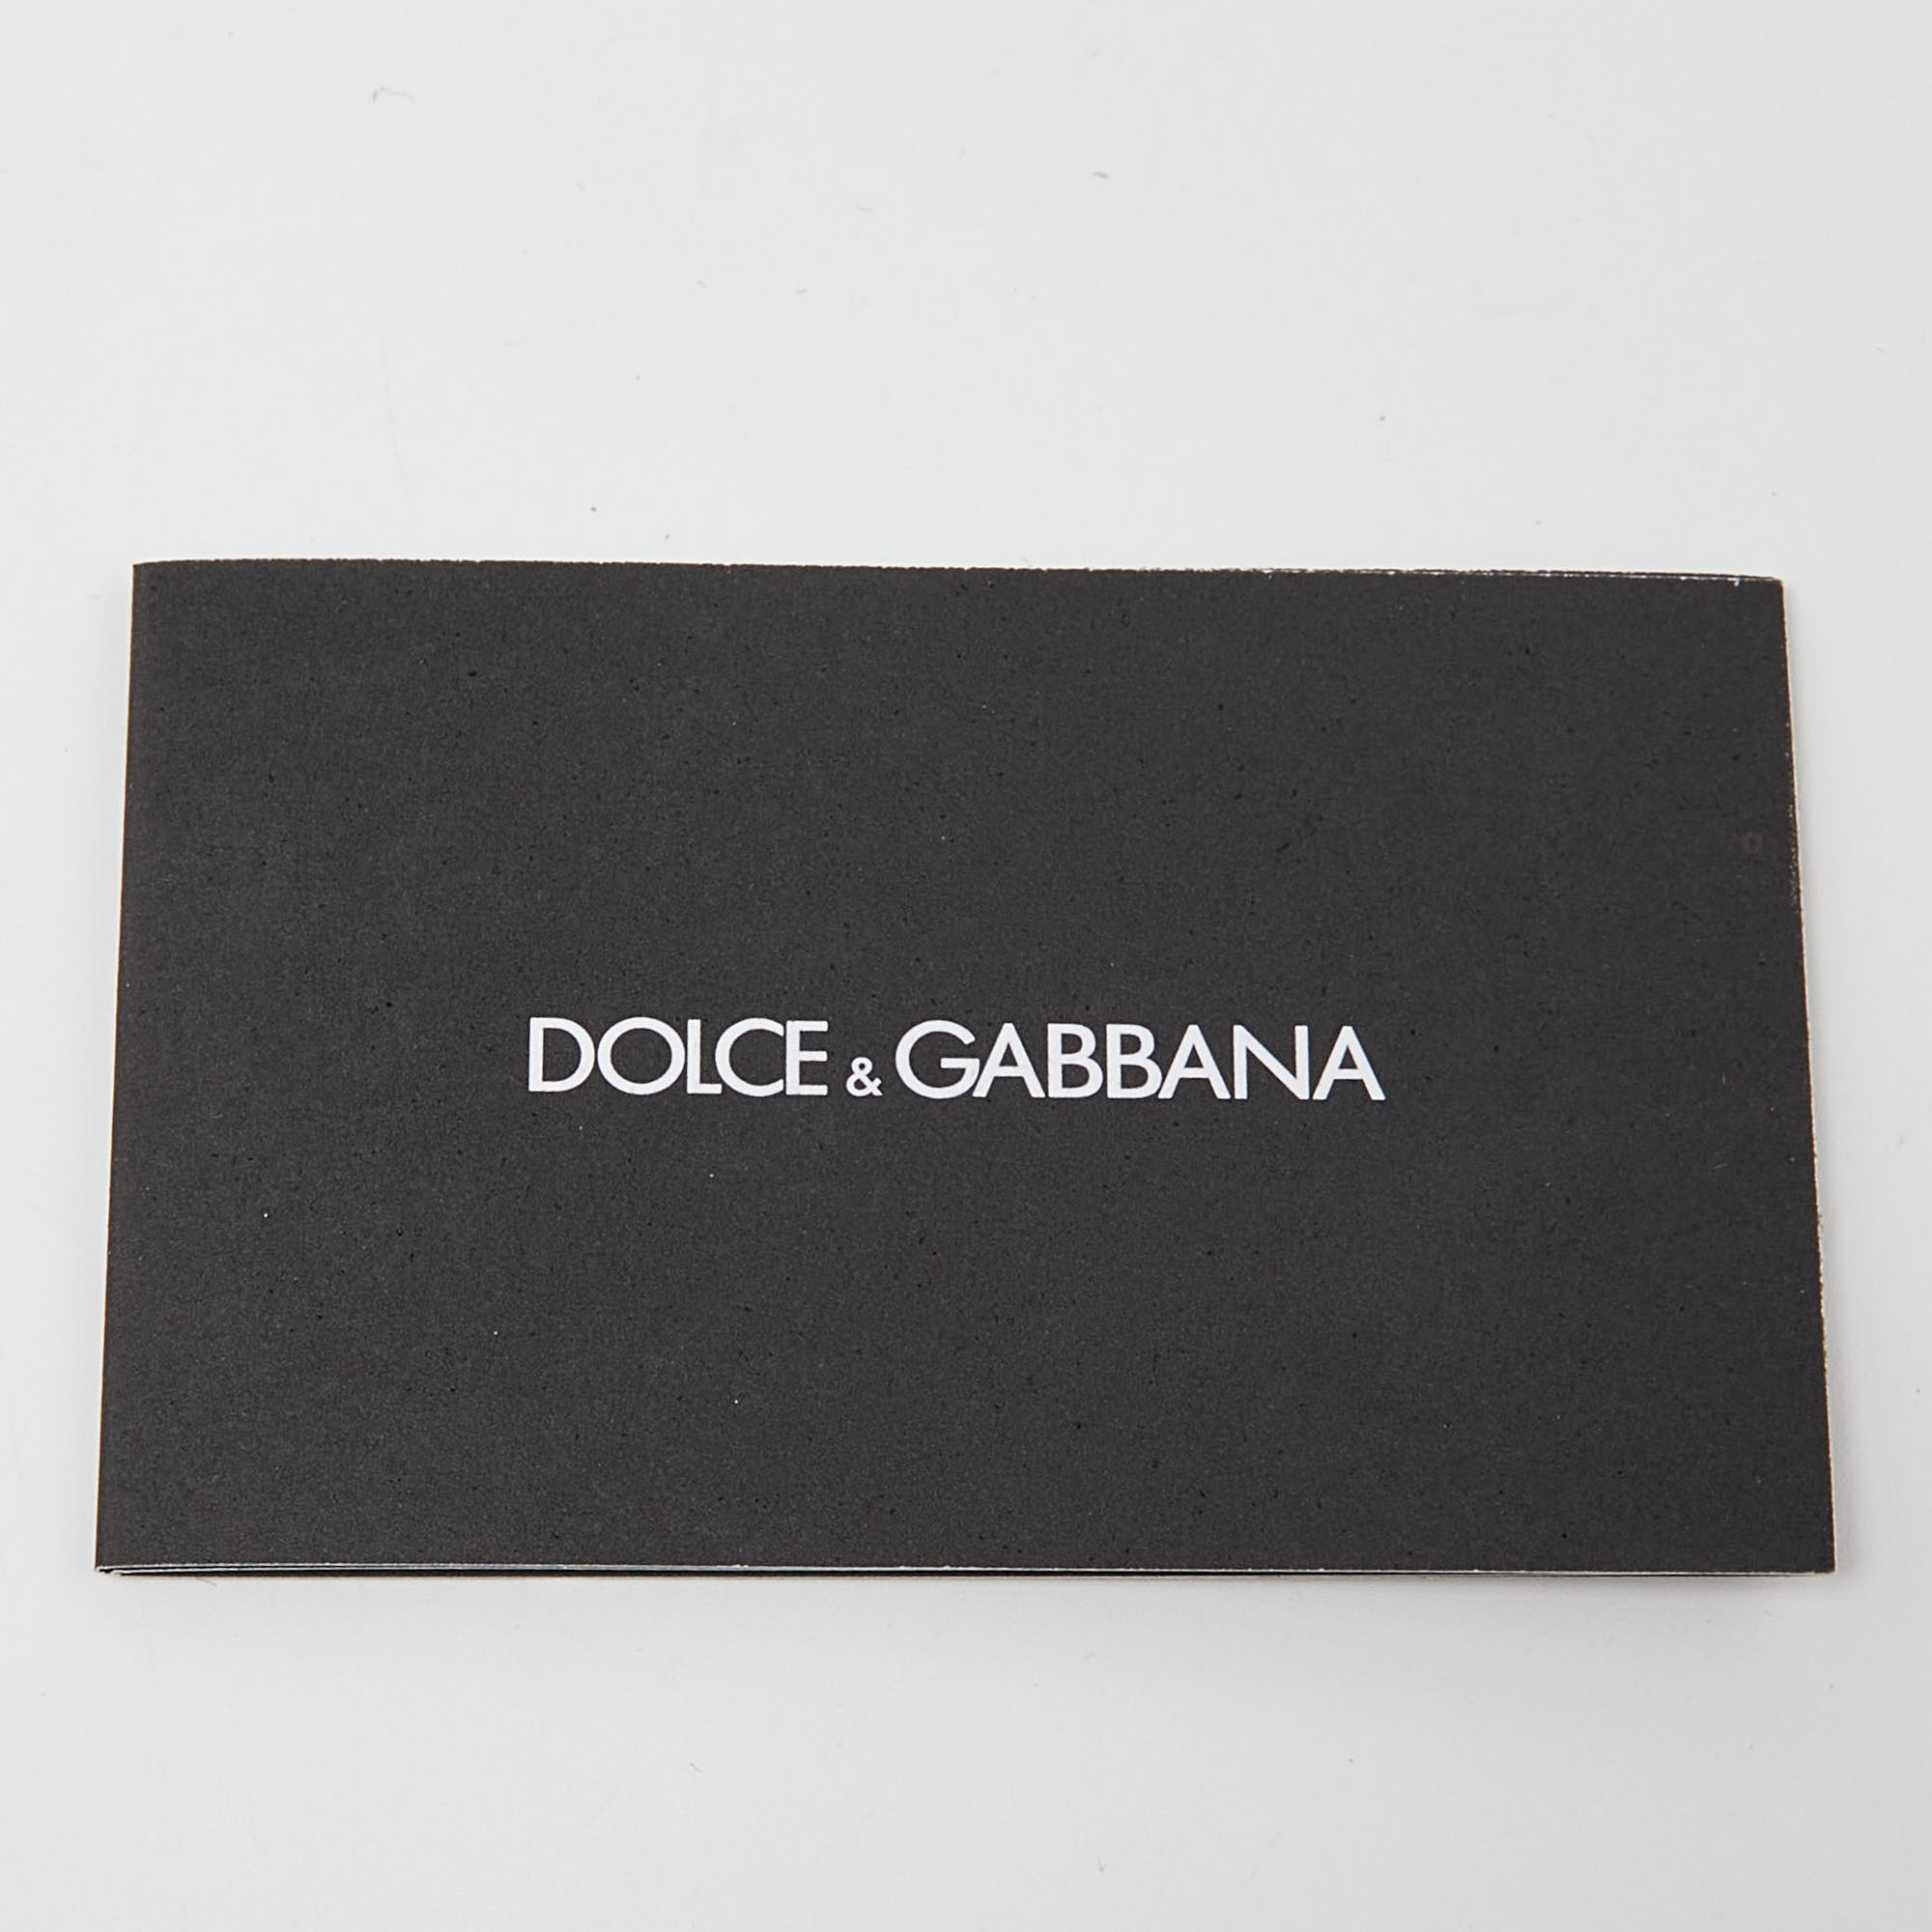 Dolce & Gabbana Grey Lizard Embossed Leather IPhone 6 Cover